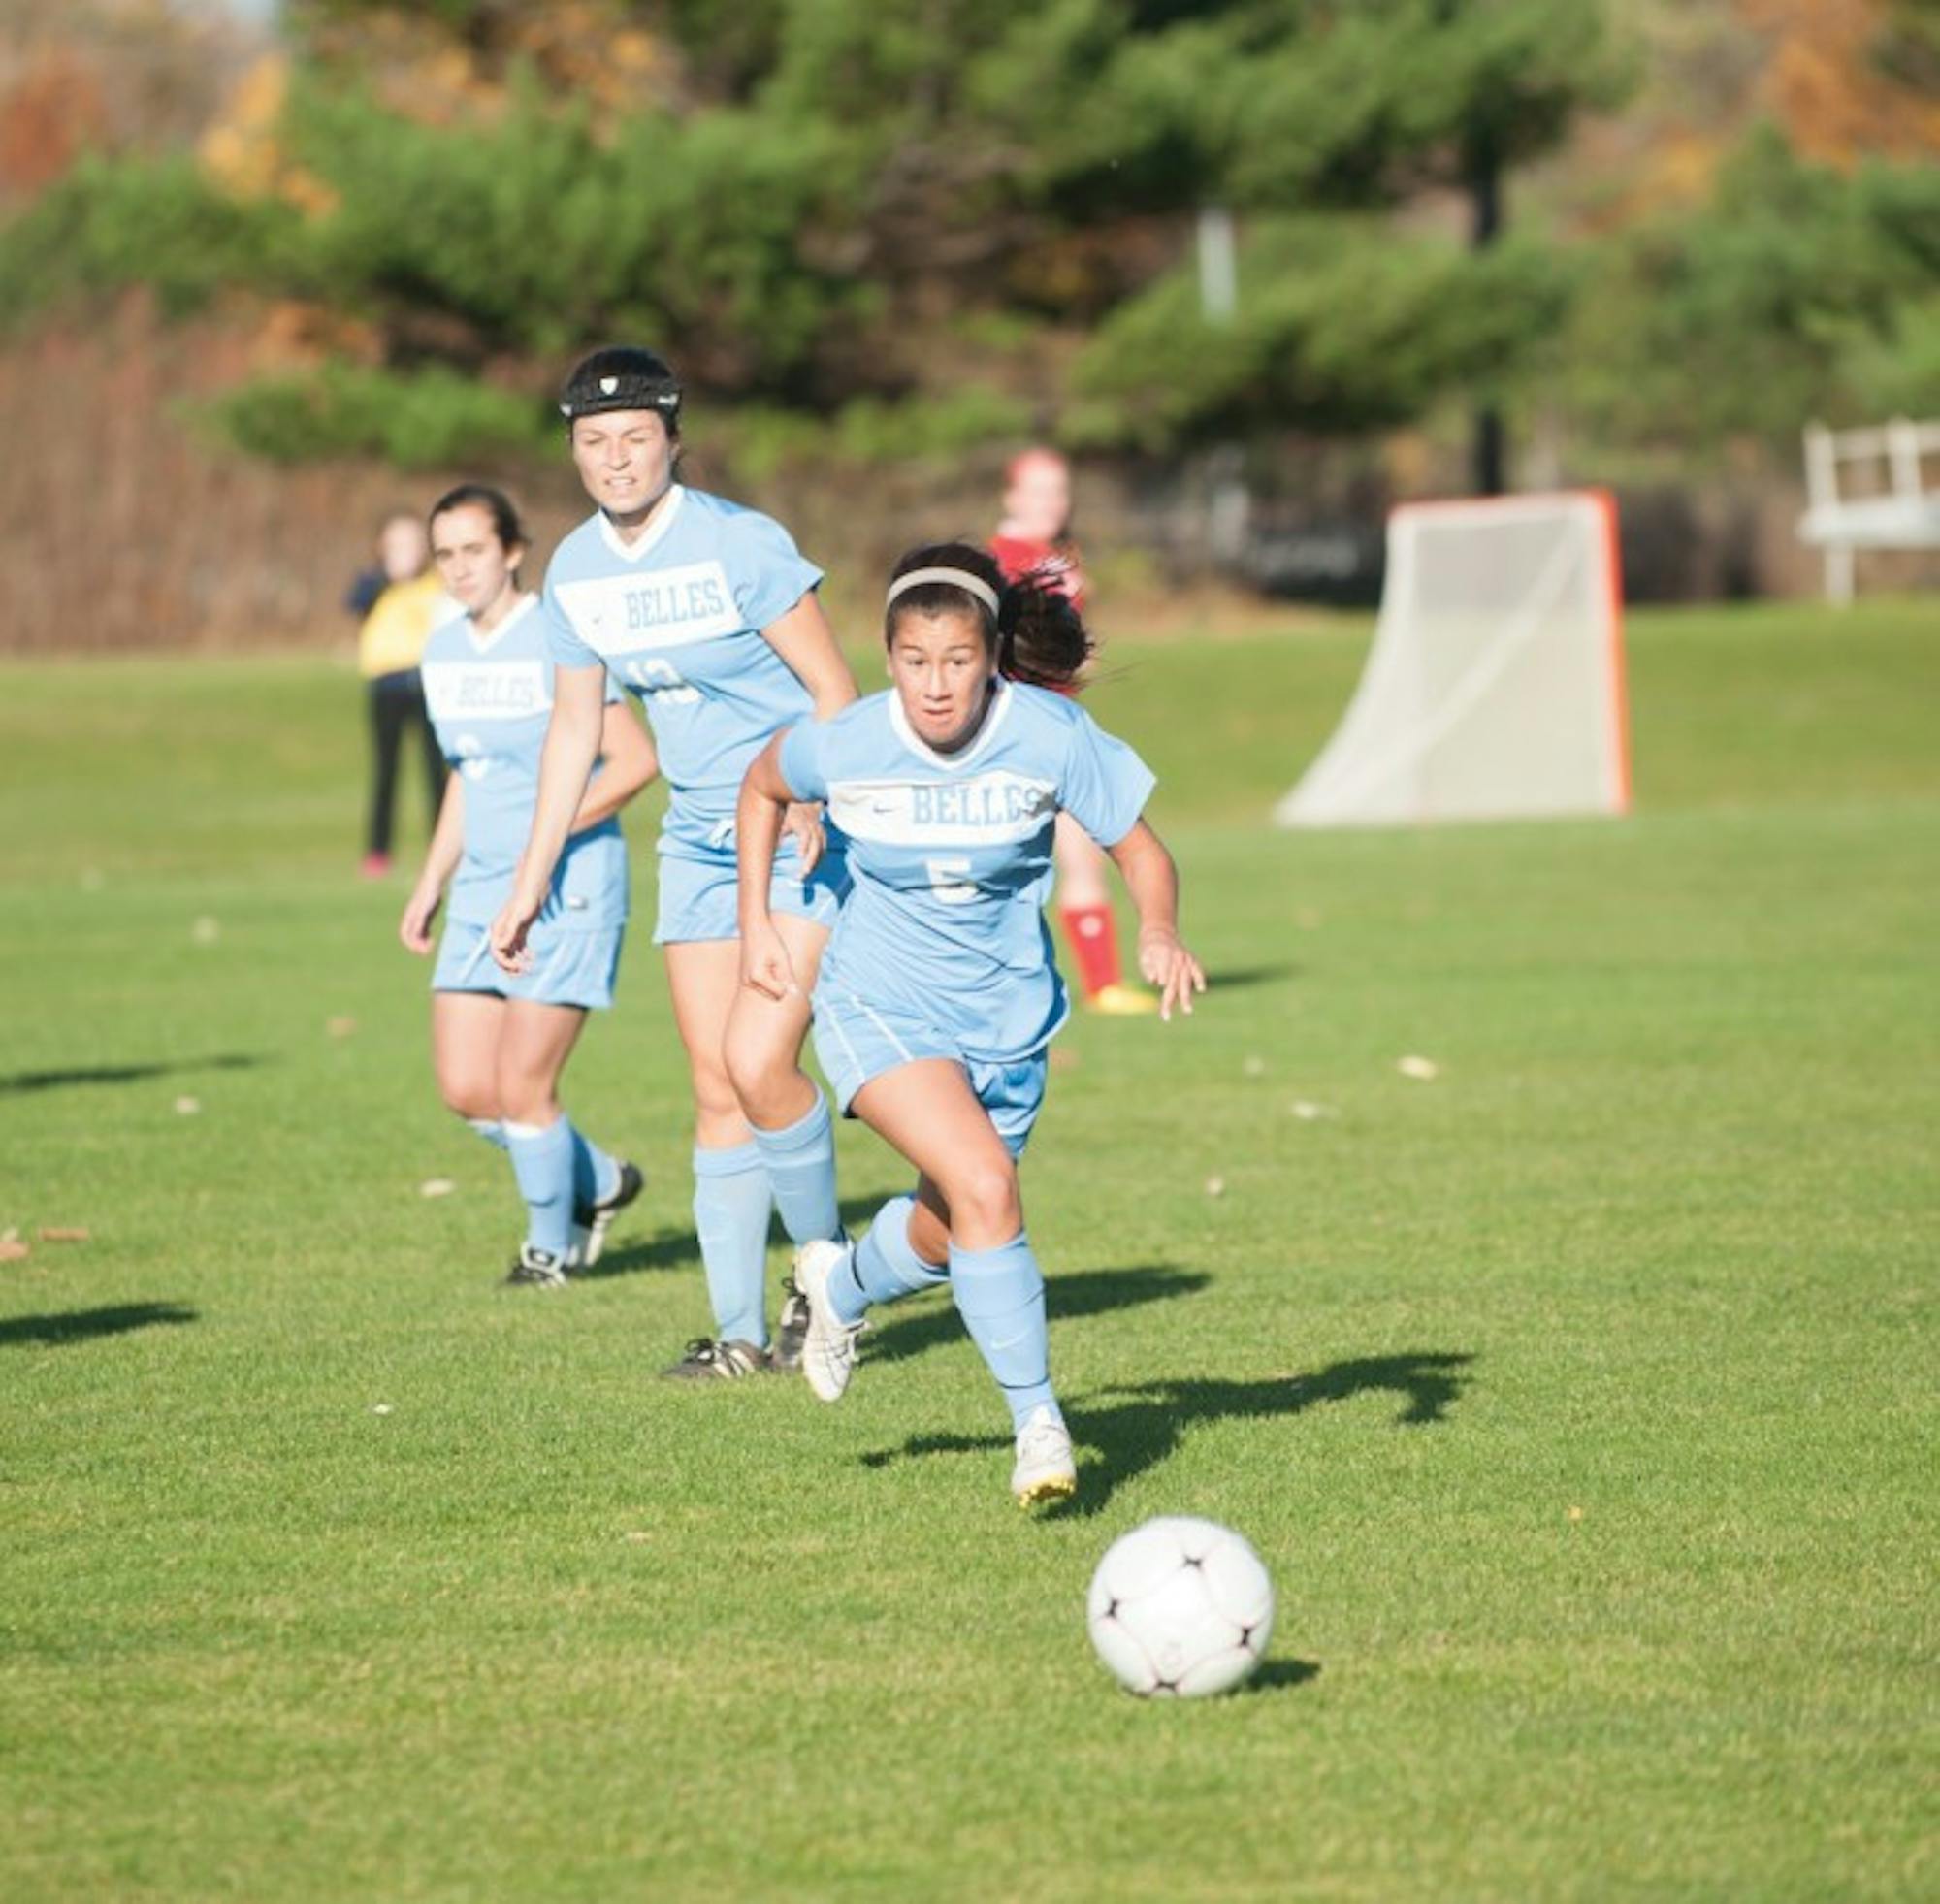 Belles freshman midfielder Baylee Adams pursues the ball during Saint Mary’s 2-0 loss to Olivet on Tuesday.